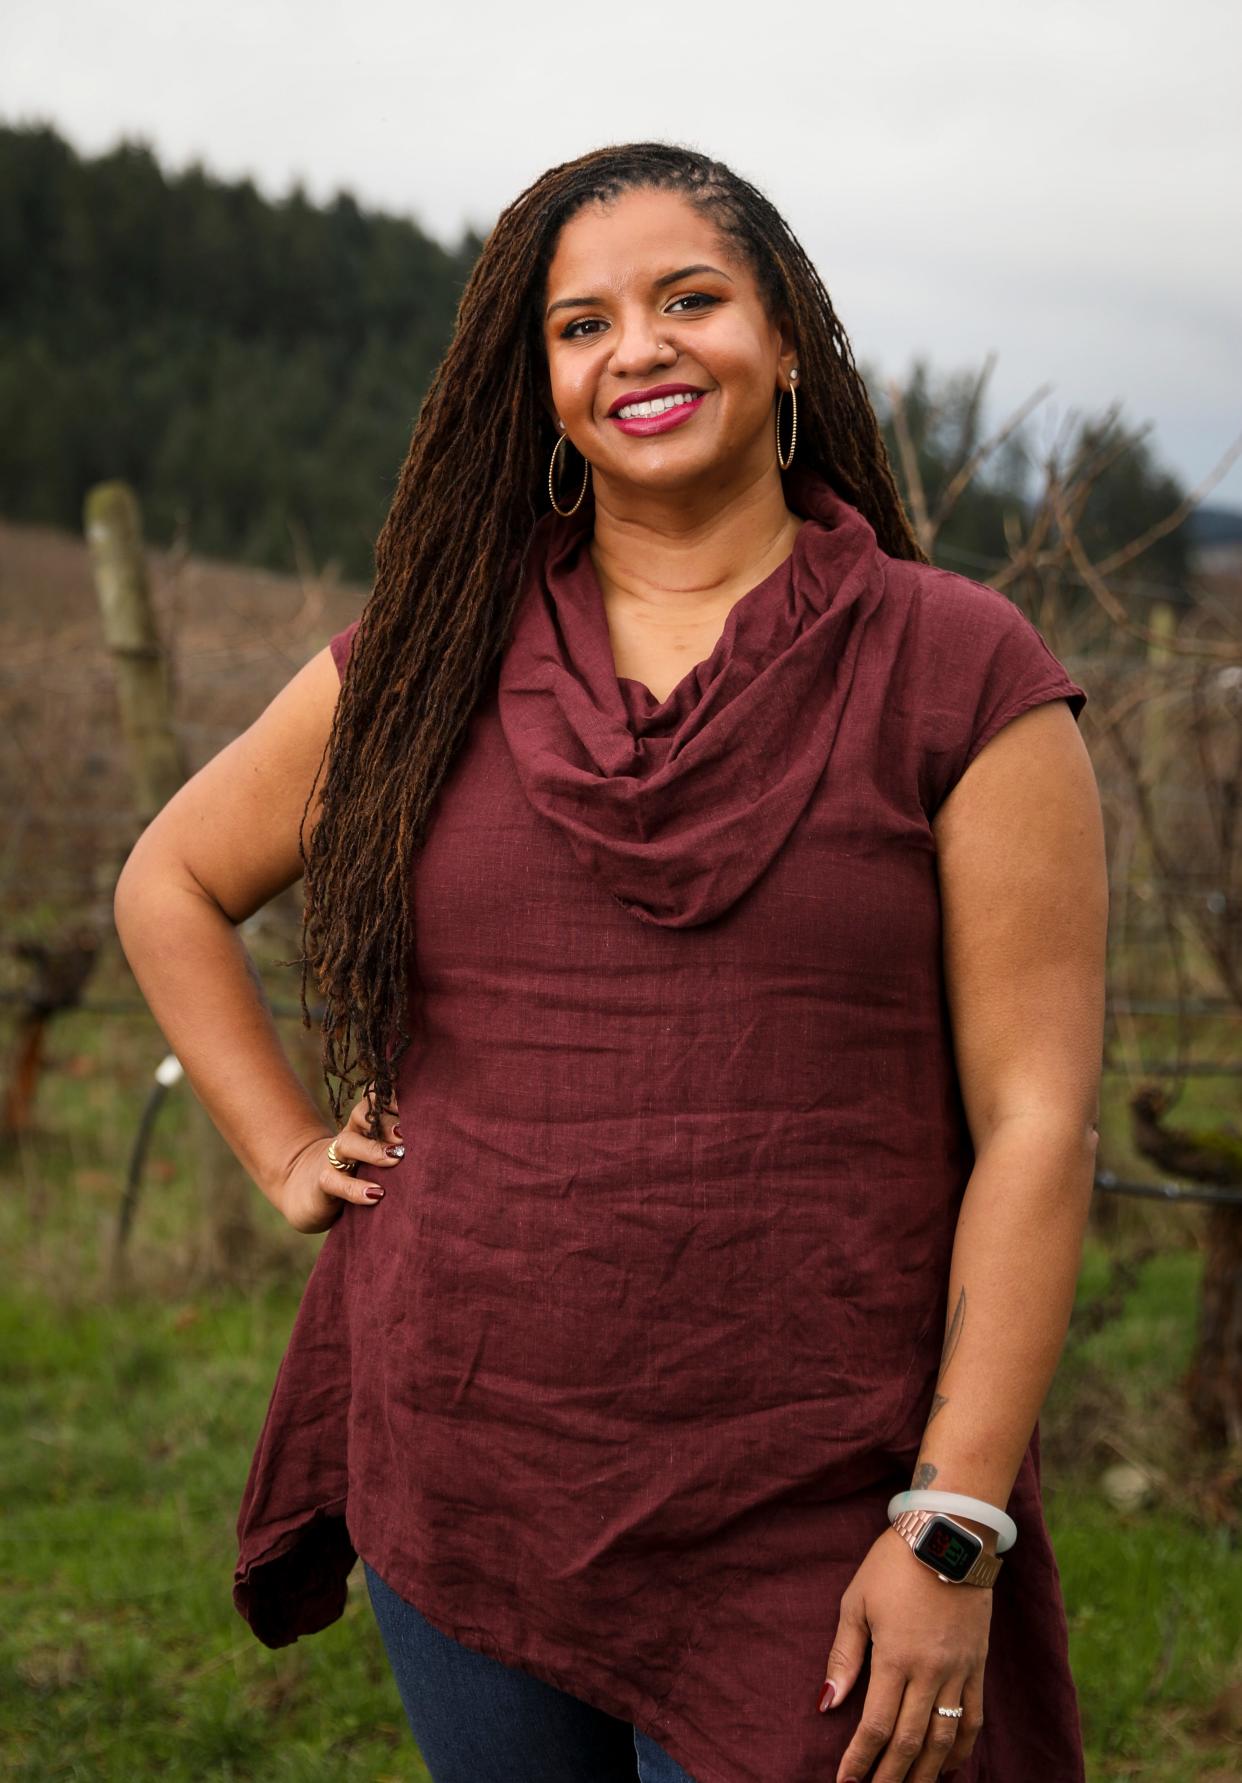 Tiquette Bramlett, USA TODAY's Women of the Year honoree from Oregon, on Wednesday, Jan. 11, 2023 at WillaKenzie Estate in Yamhill, Ore. Bramlett is the first Black woman appointed to oversee a U.S. winery and the founder of Our Legacy Harvested, an organization whose aim is to advance the BIPOC community in the wine industry.